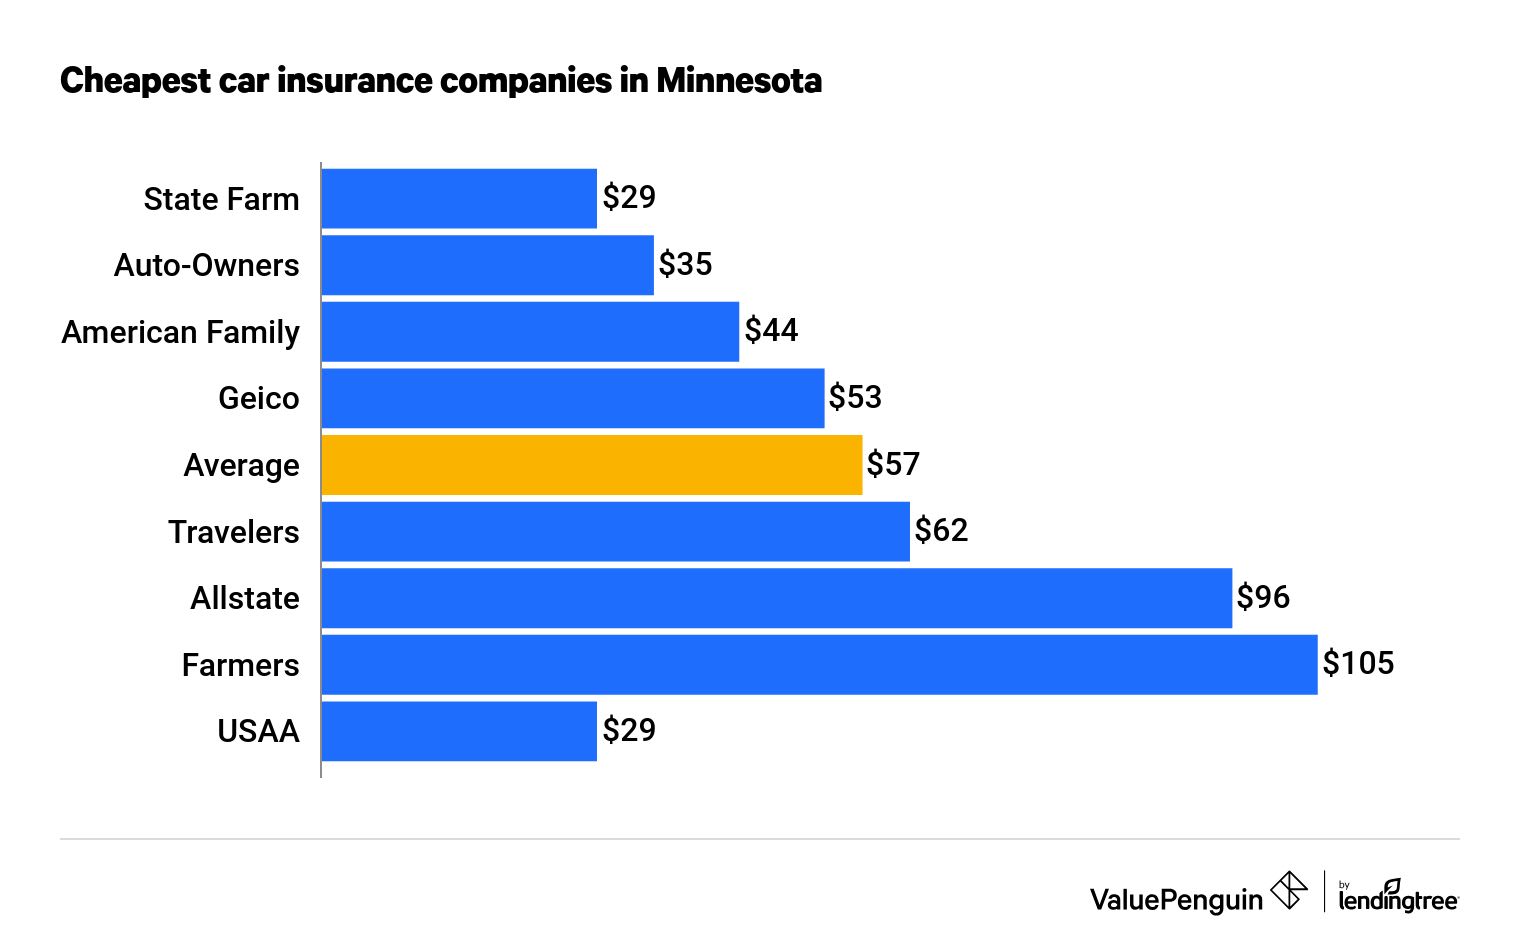 who-has-the-cheapest-auto-insurance-quotes-in-minnesota-valuepenguin